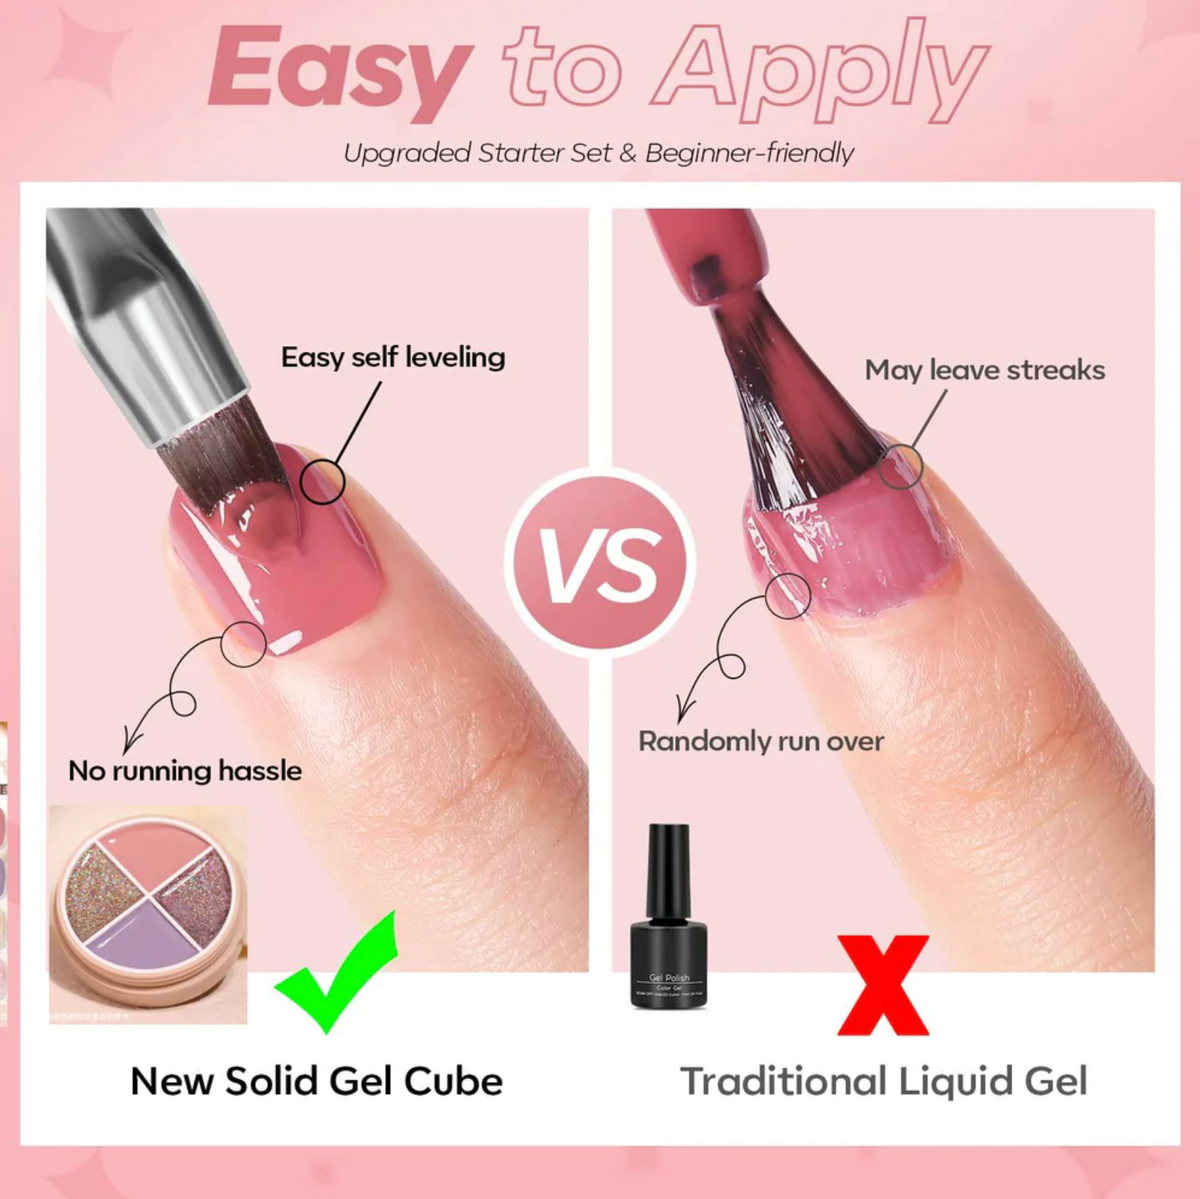 Solid Nail Gel Glue for Press On Nails And Soft Gel Nail Tips – CurvLife